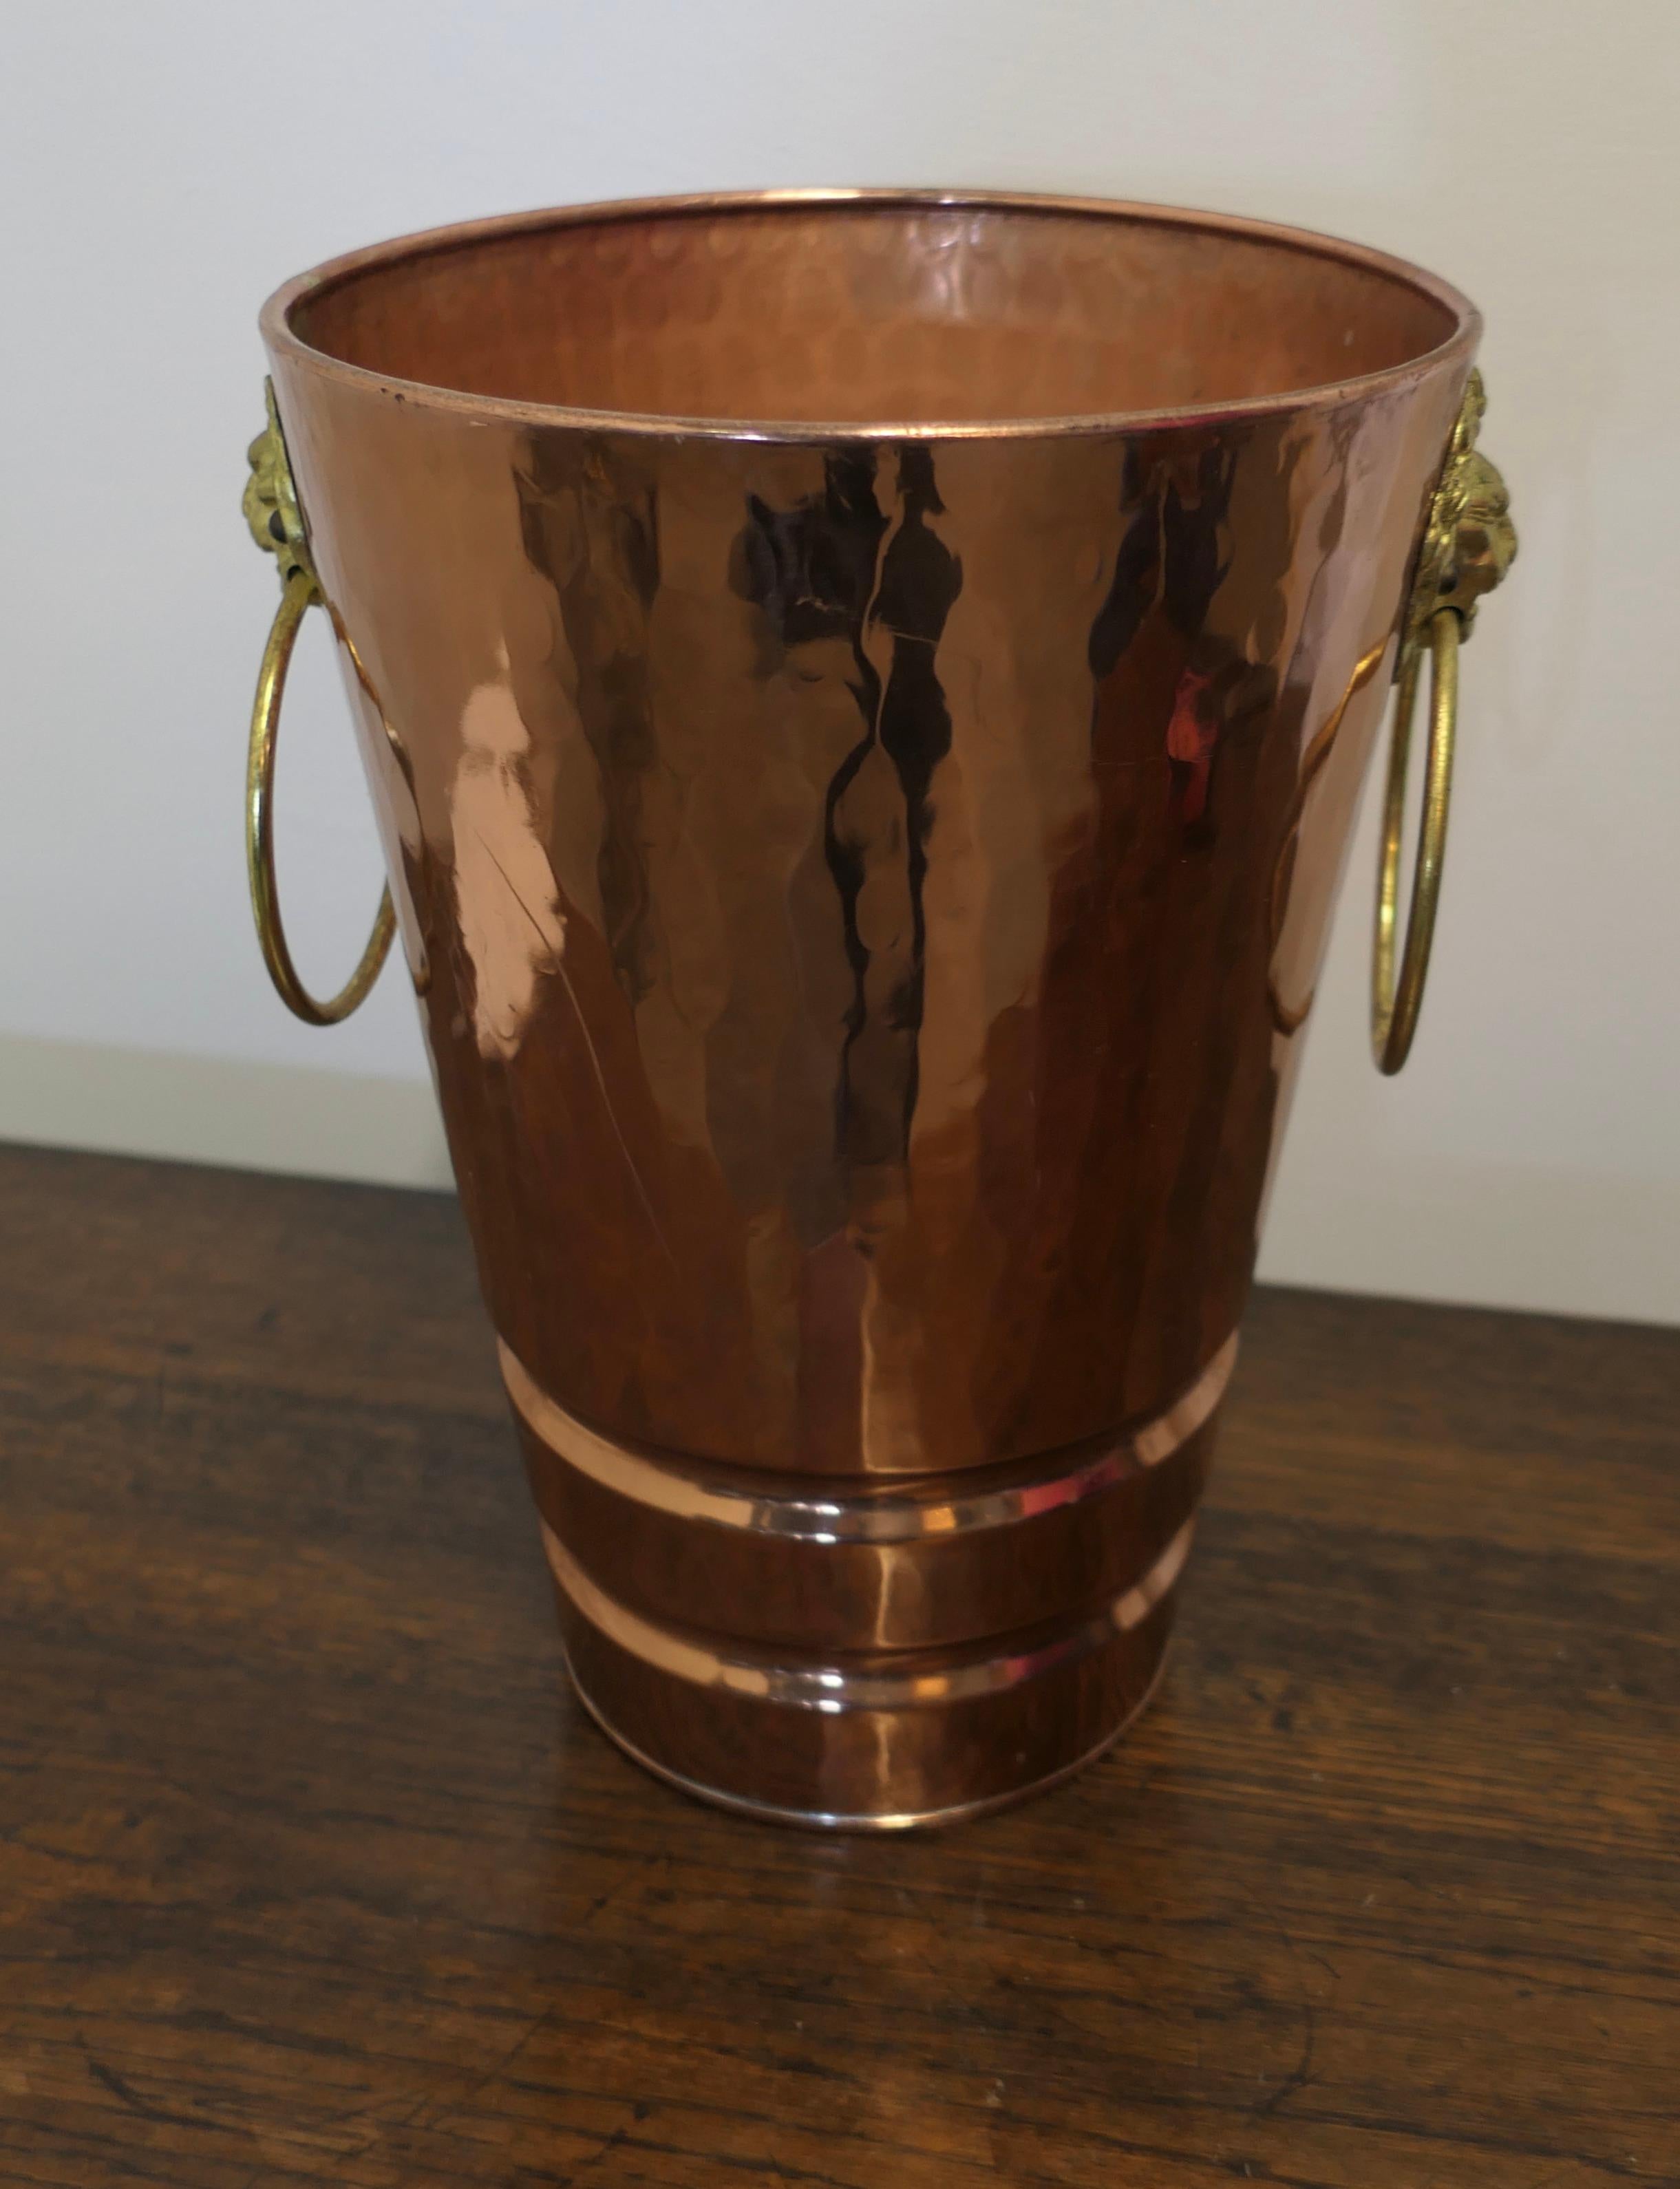 Extra large copper and brass Villedieu champagne/ice bucket 

This is a lovely looking Vintage Villedieu Champagne/Ice Bucket Made from Copper and Brass, Made in France
The bucket has a rolled top edge and the ring handles are set with lions